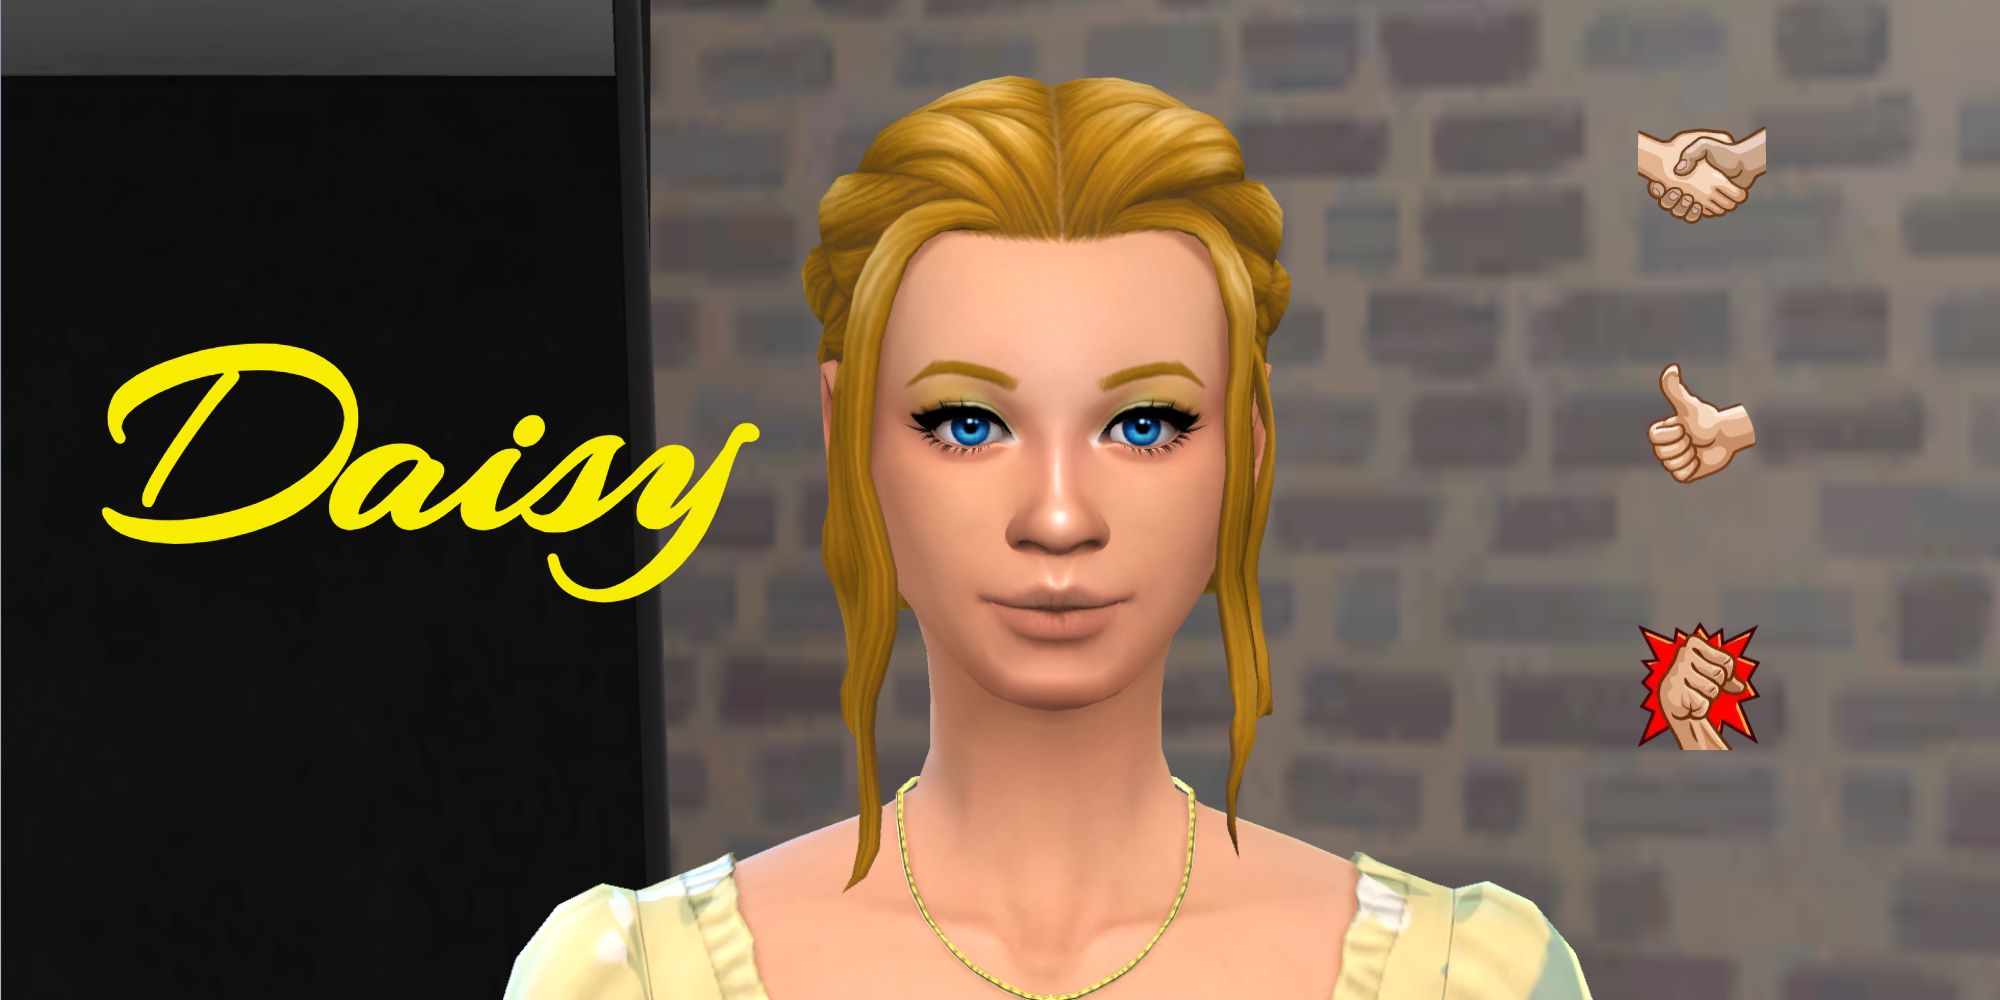 A yellow-haired Sim from the daisy generation